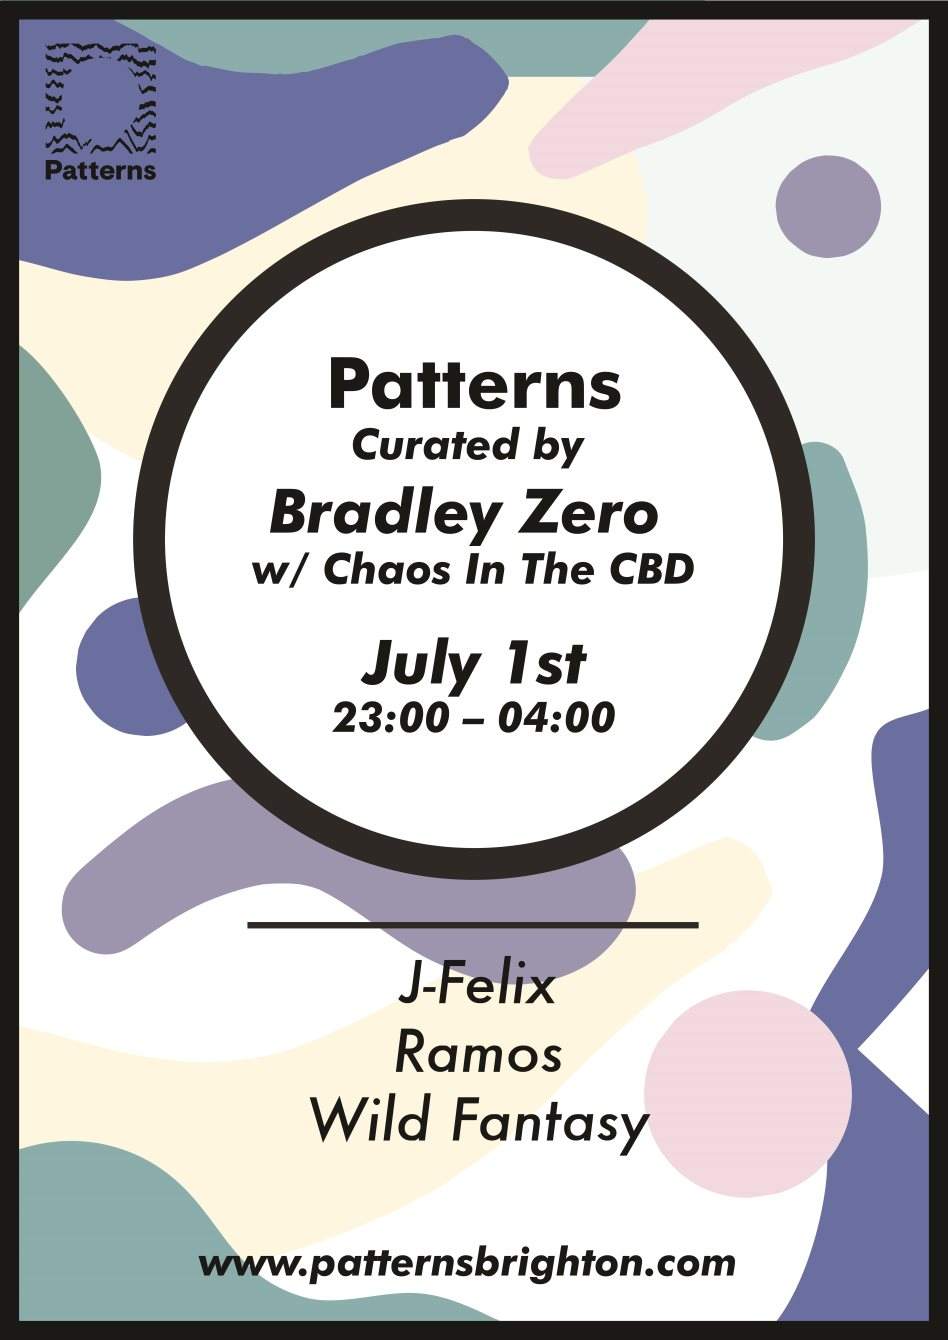 Patterns Curated by Bradley Zero with Chaos In The CBD - Página frontal